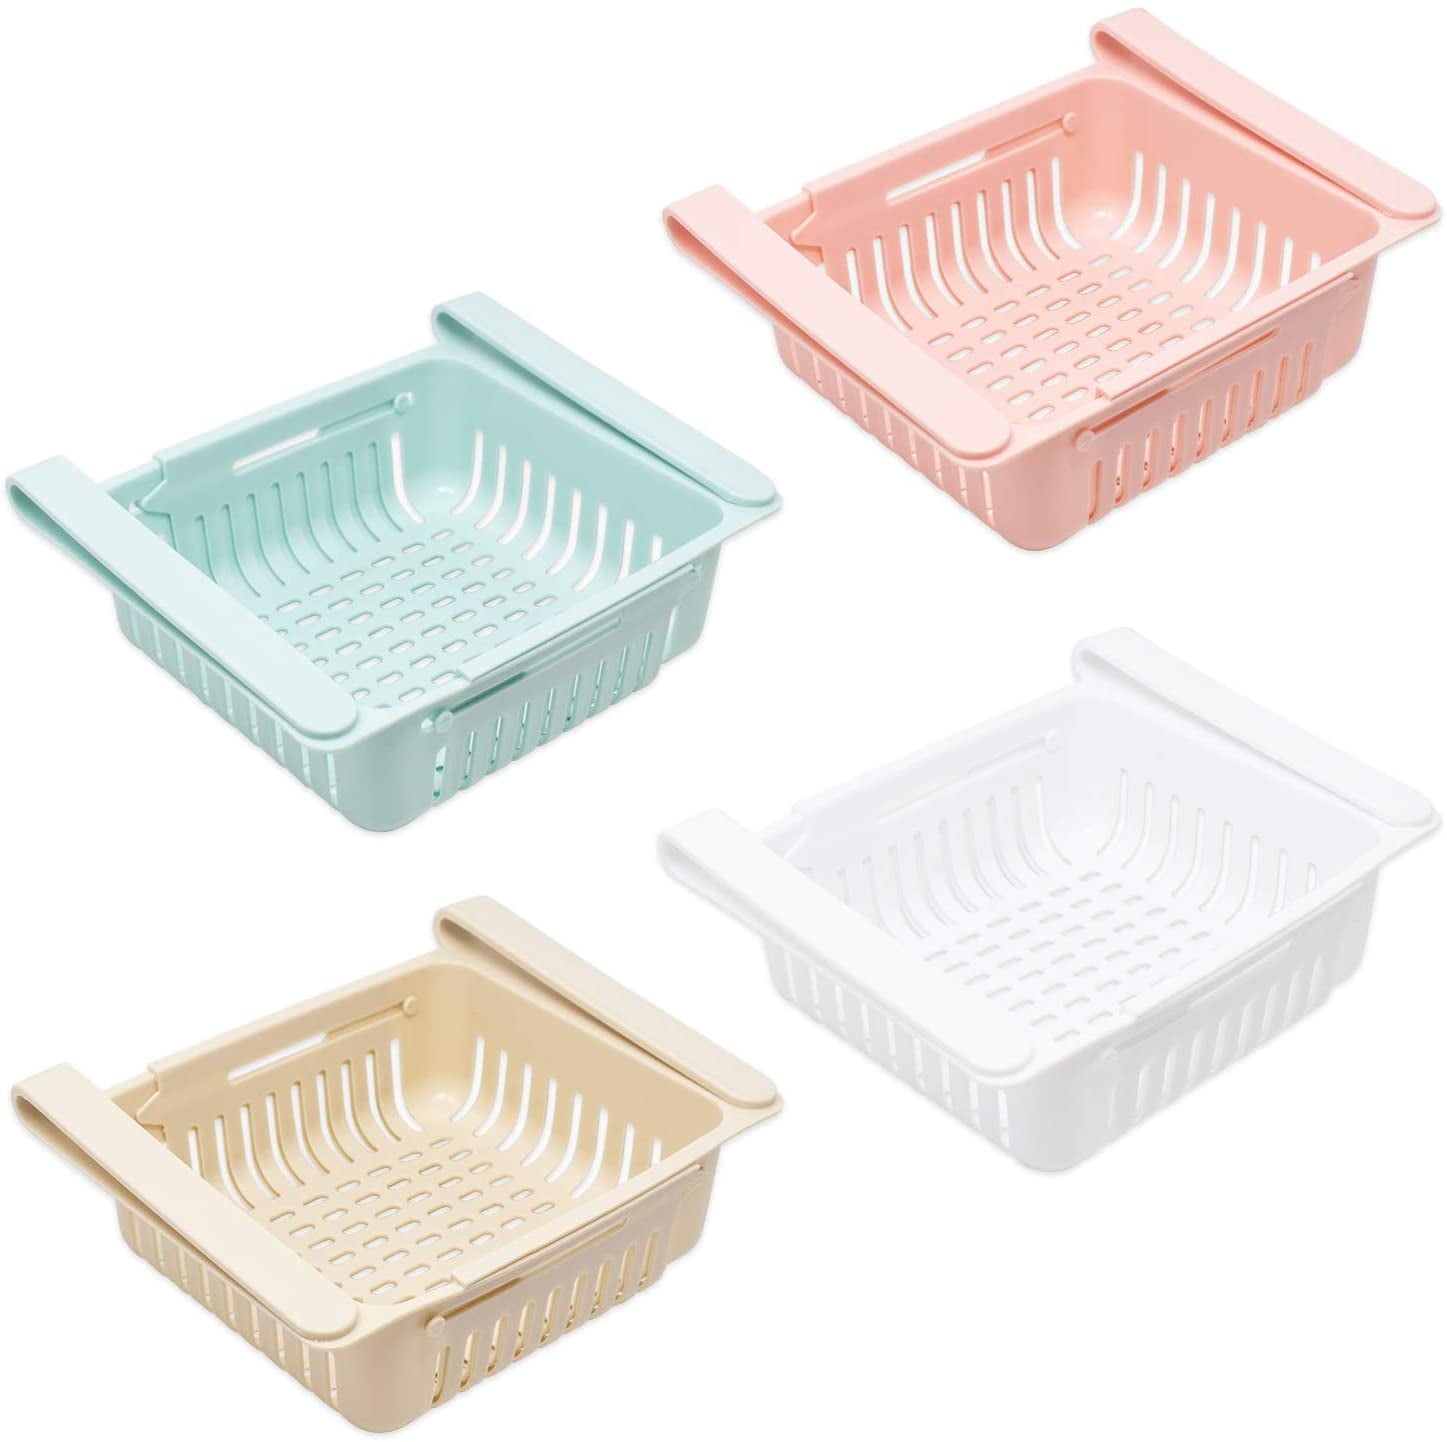 Storage Container Adjustable Plastic Fridge Baskets Pull Out Drawer Organizer